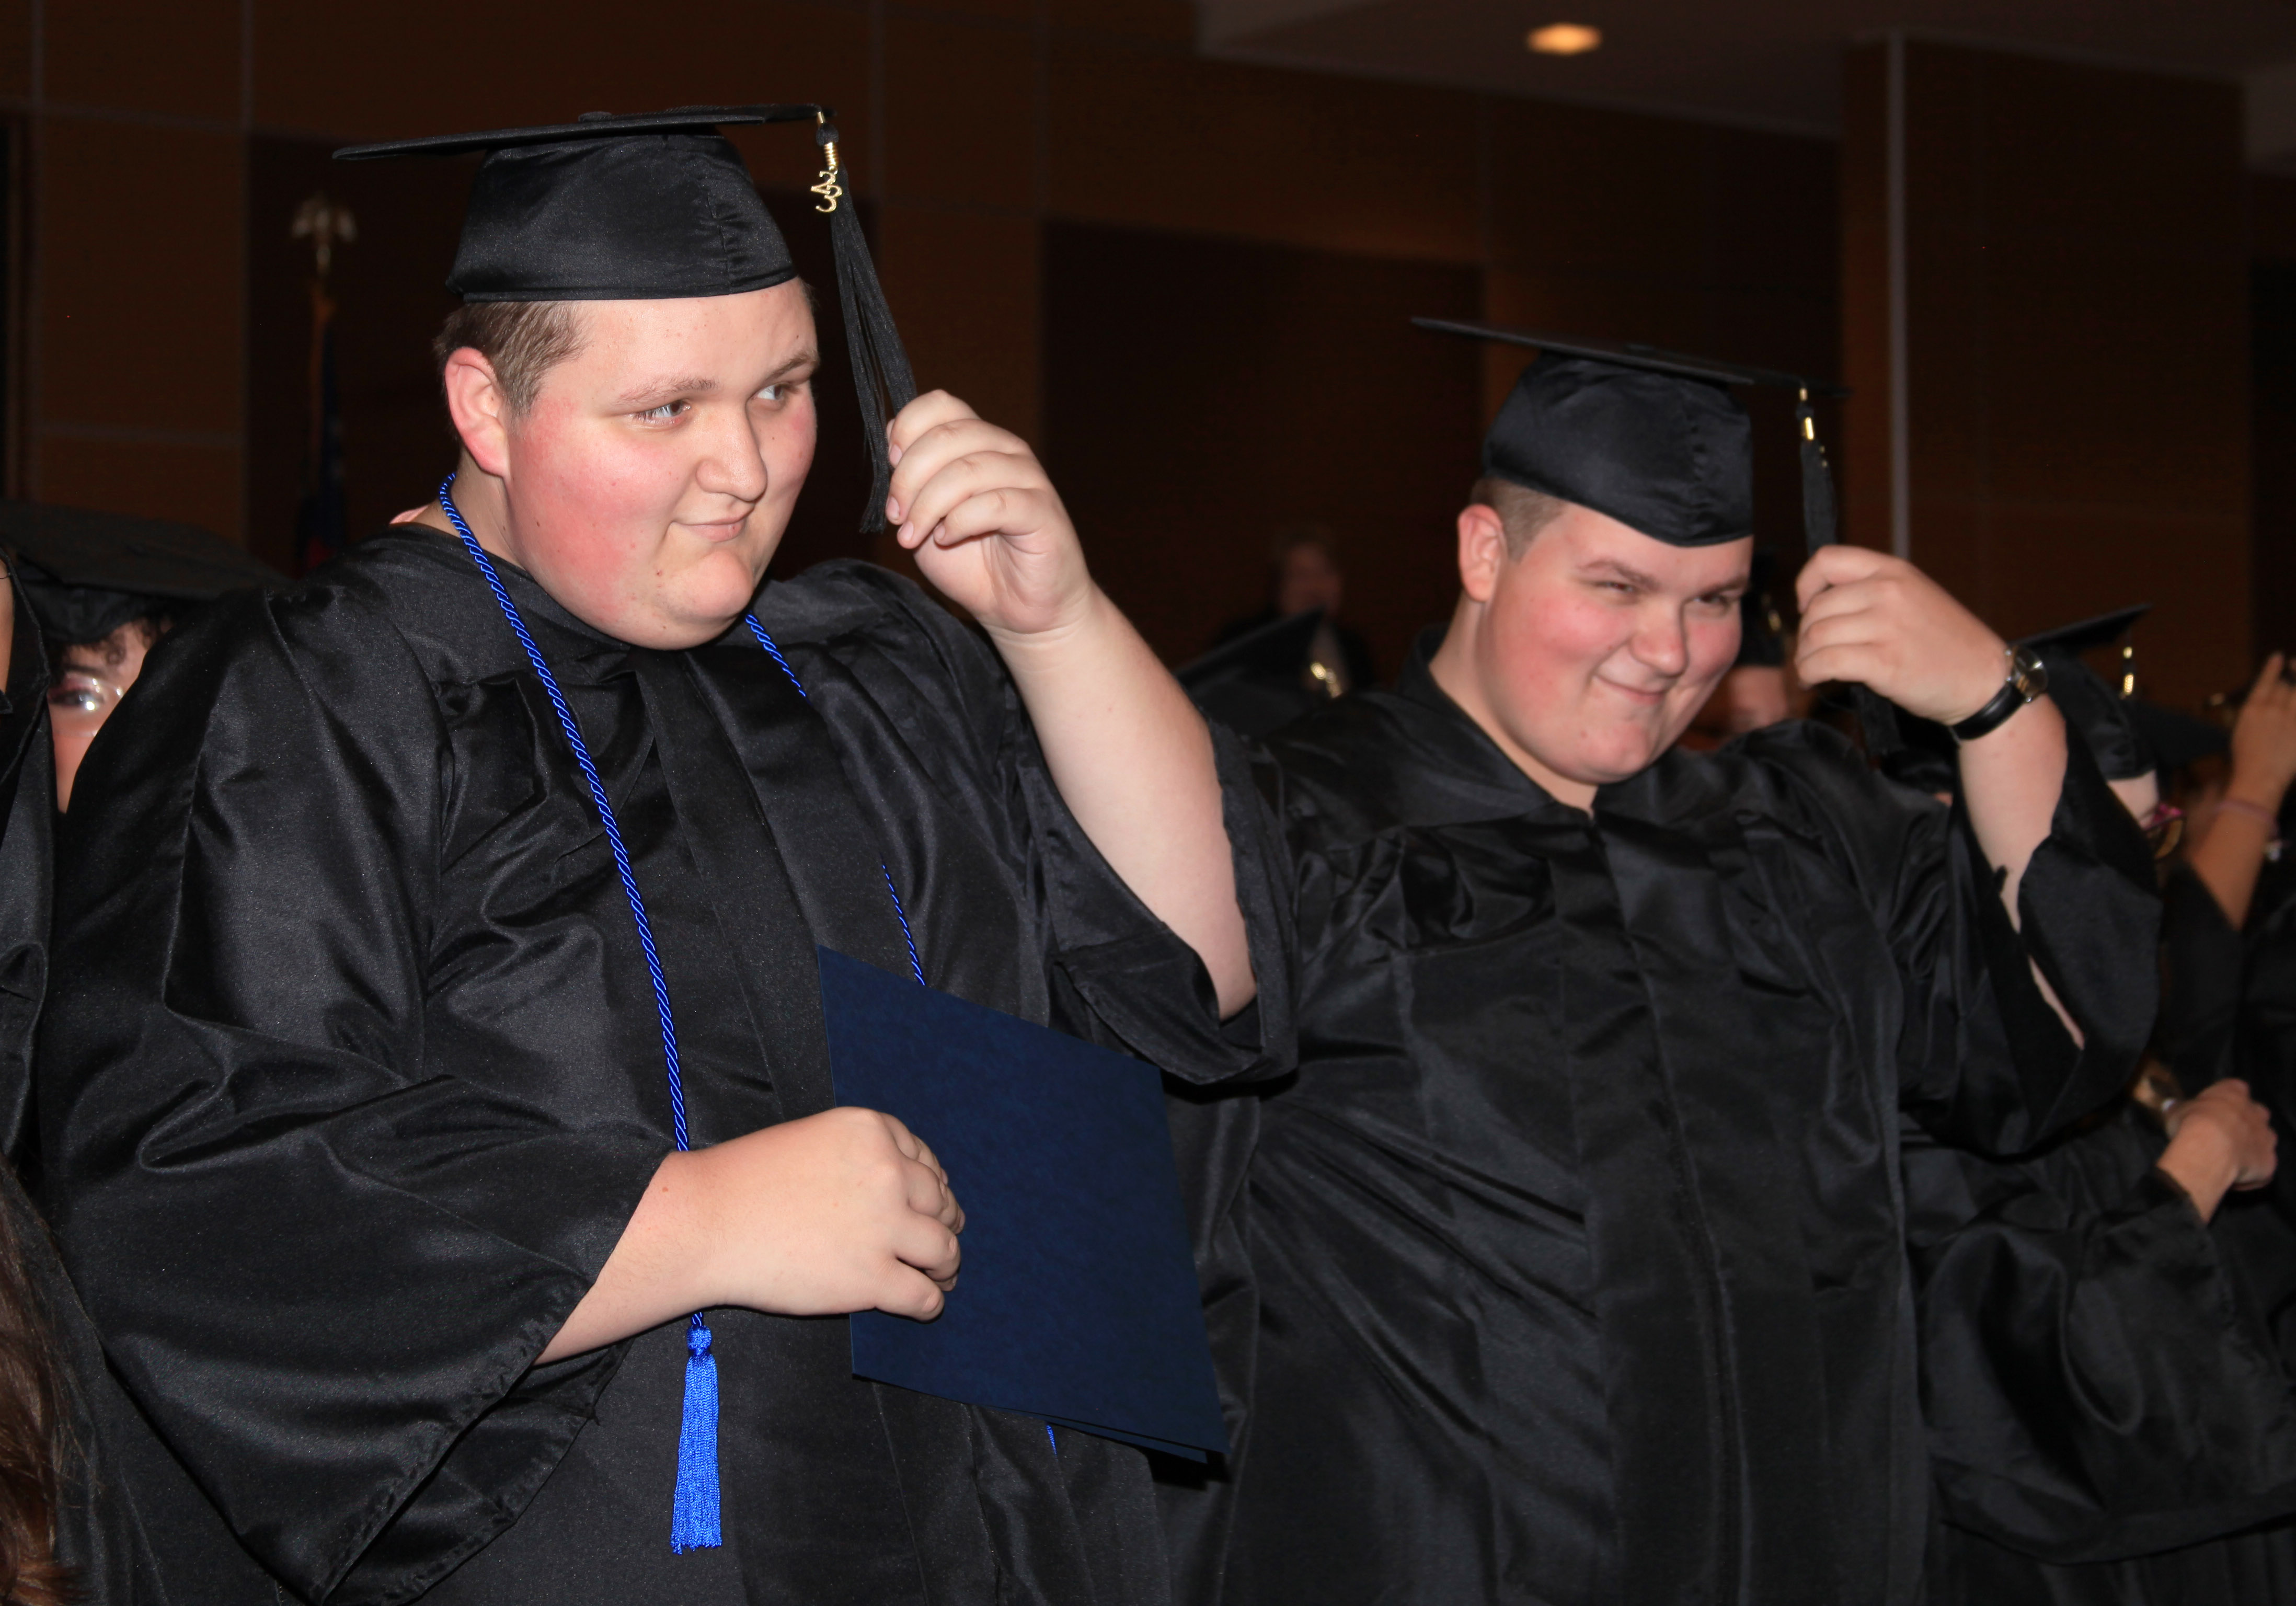 Christopher Shaw (left) and Aron Shaw move their tassels to celebrate graduating from GNTC’s Adult Education program with their GED® diplomas.